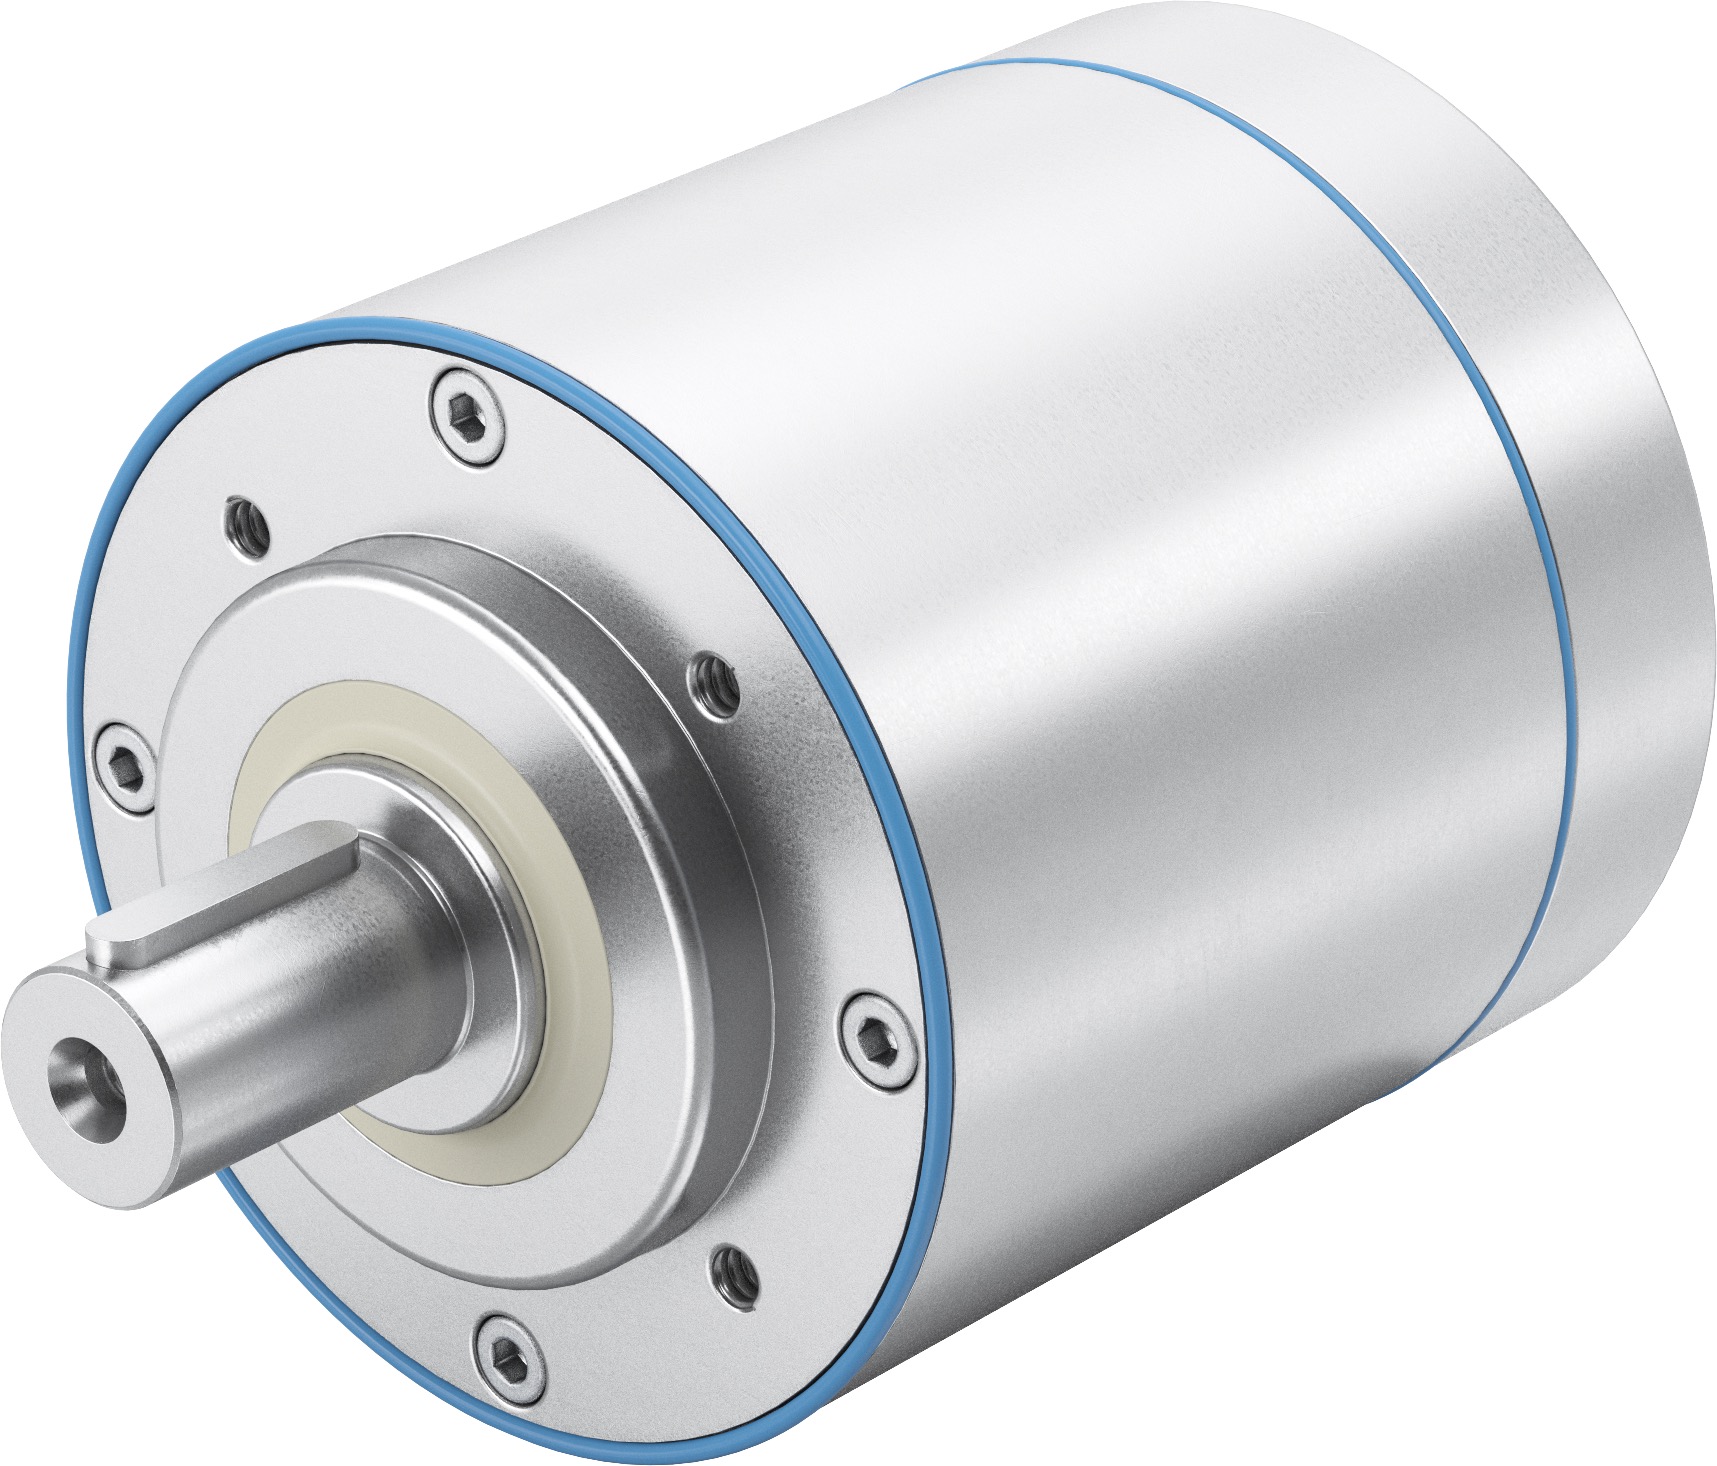 hygienic planetary gearboxes by rehfuss